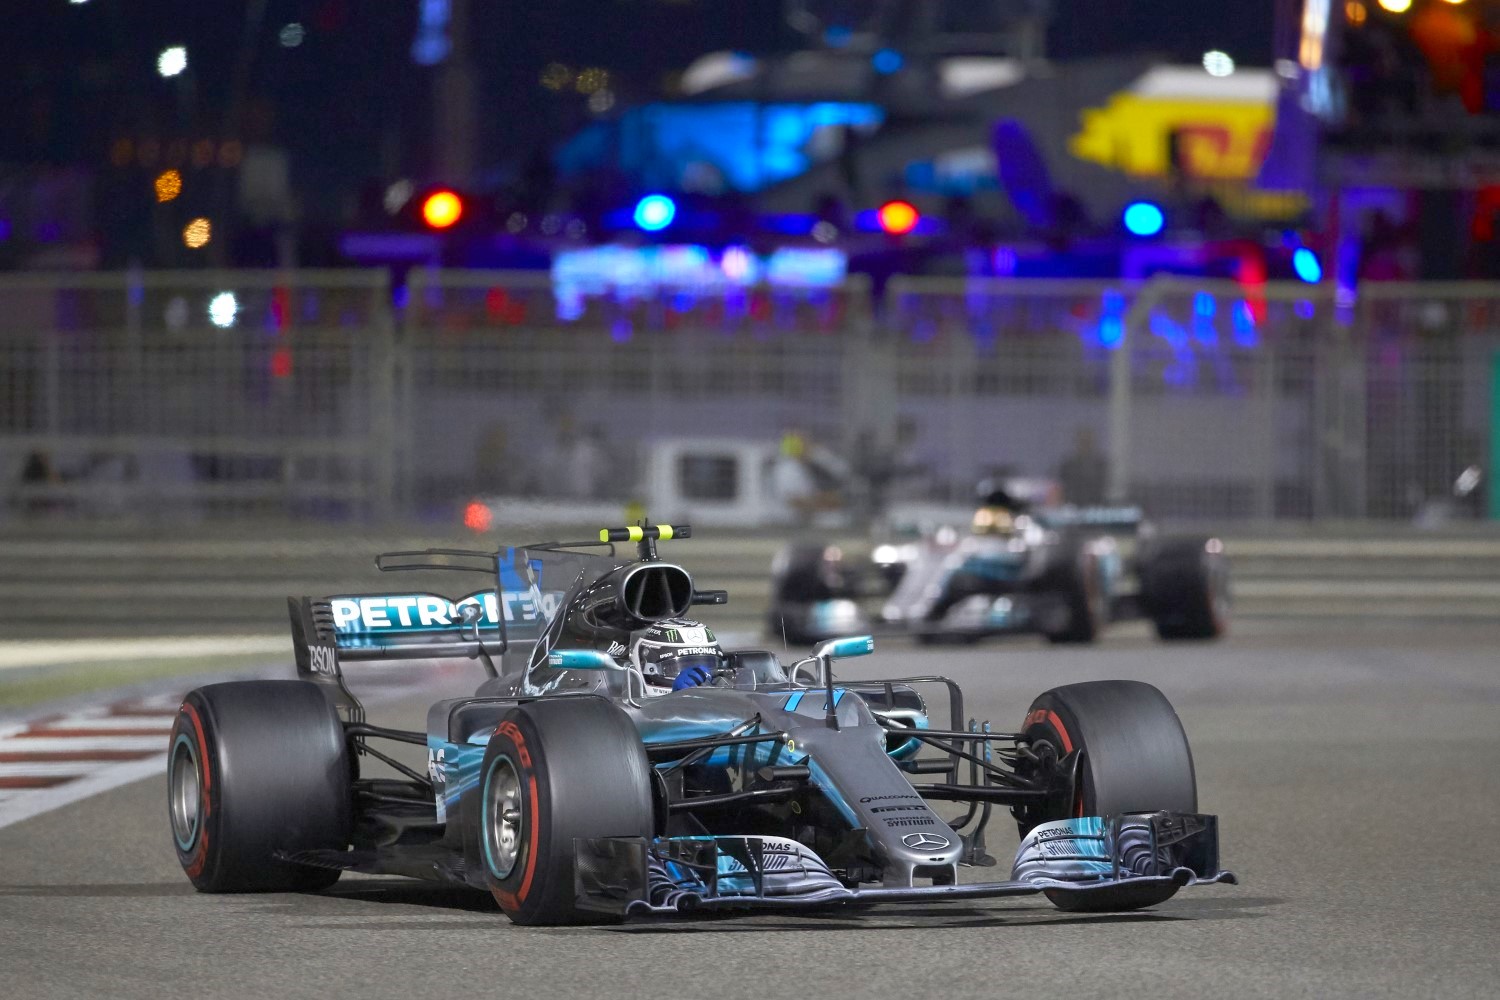 Bottas controlled the pace at the front in his Aldo Costa wonder machine